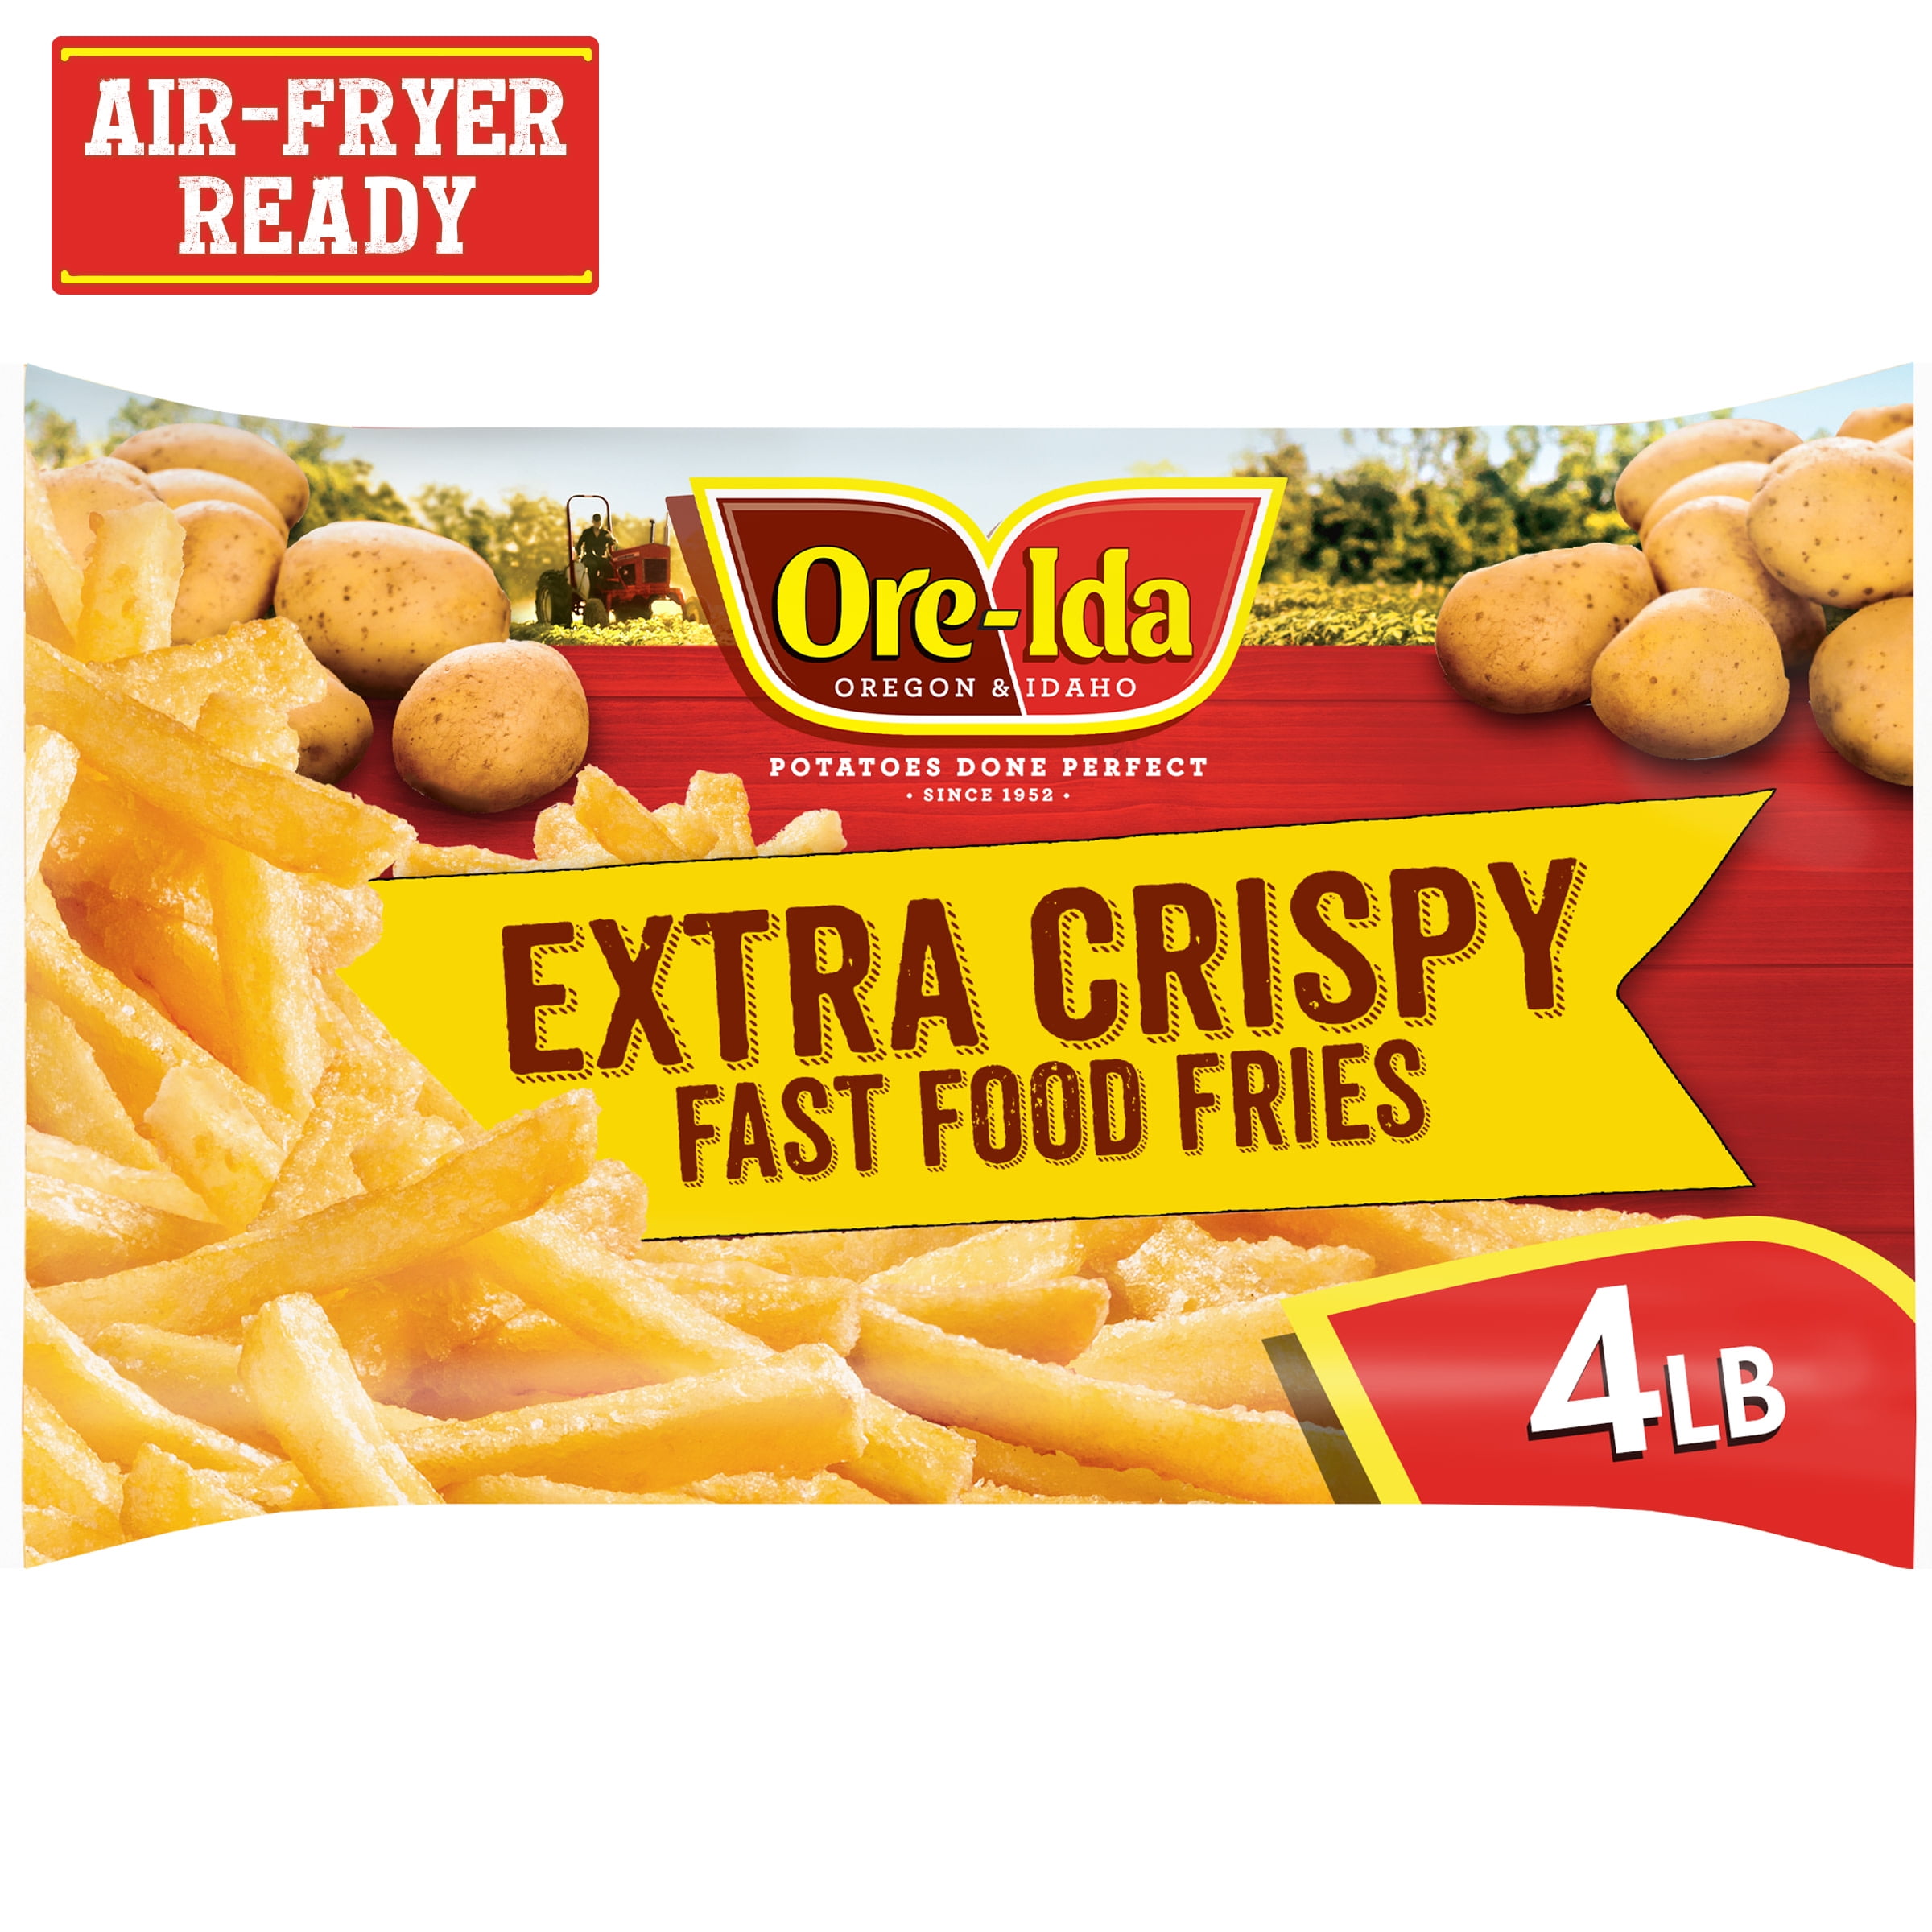 frozen french fries brands